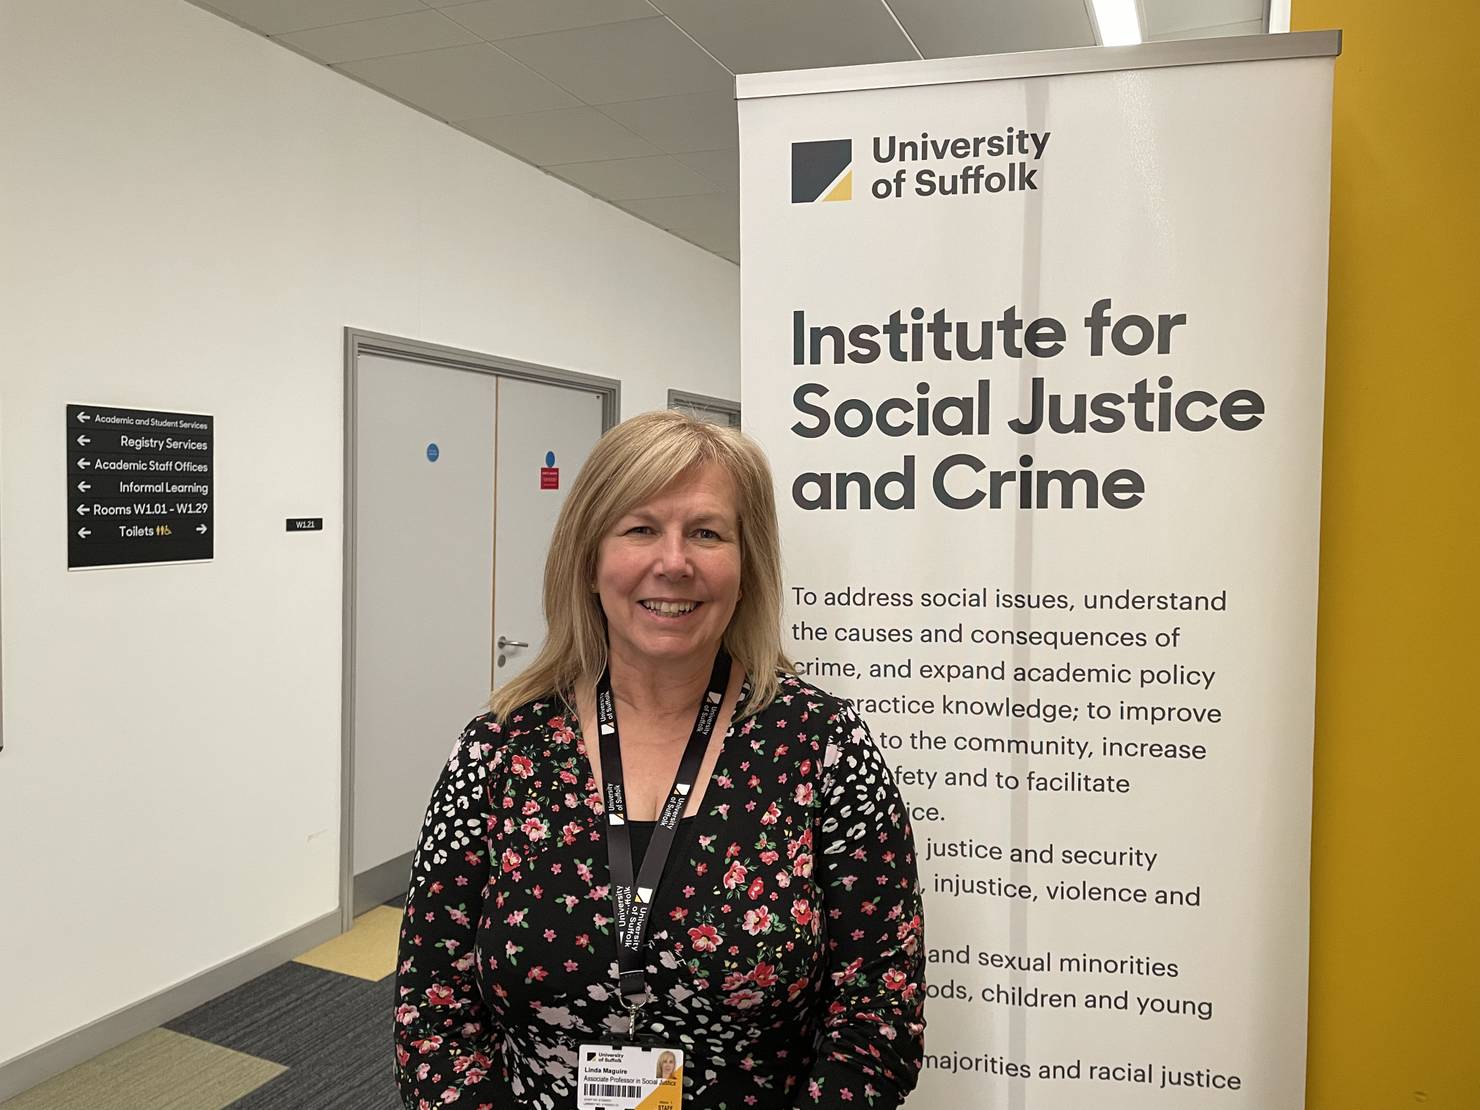 Linda Maguire standing next to the sign which says Institute for Social Justice and Crime